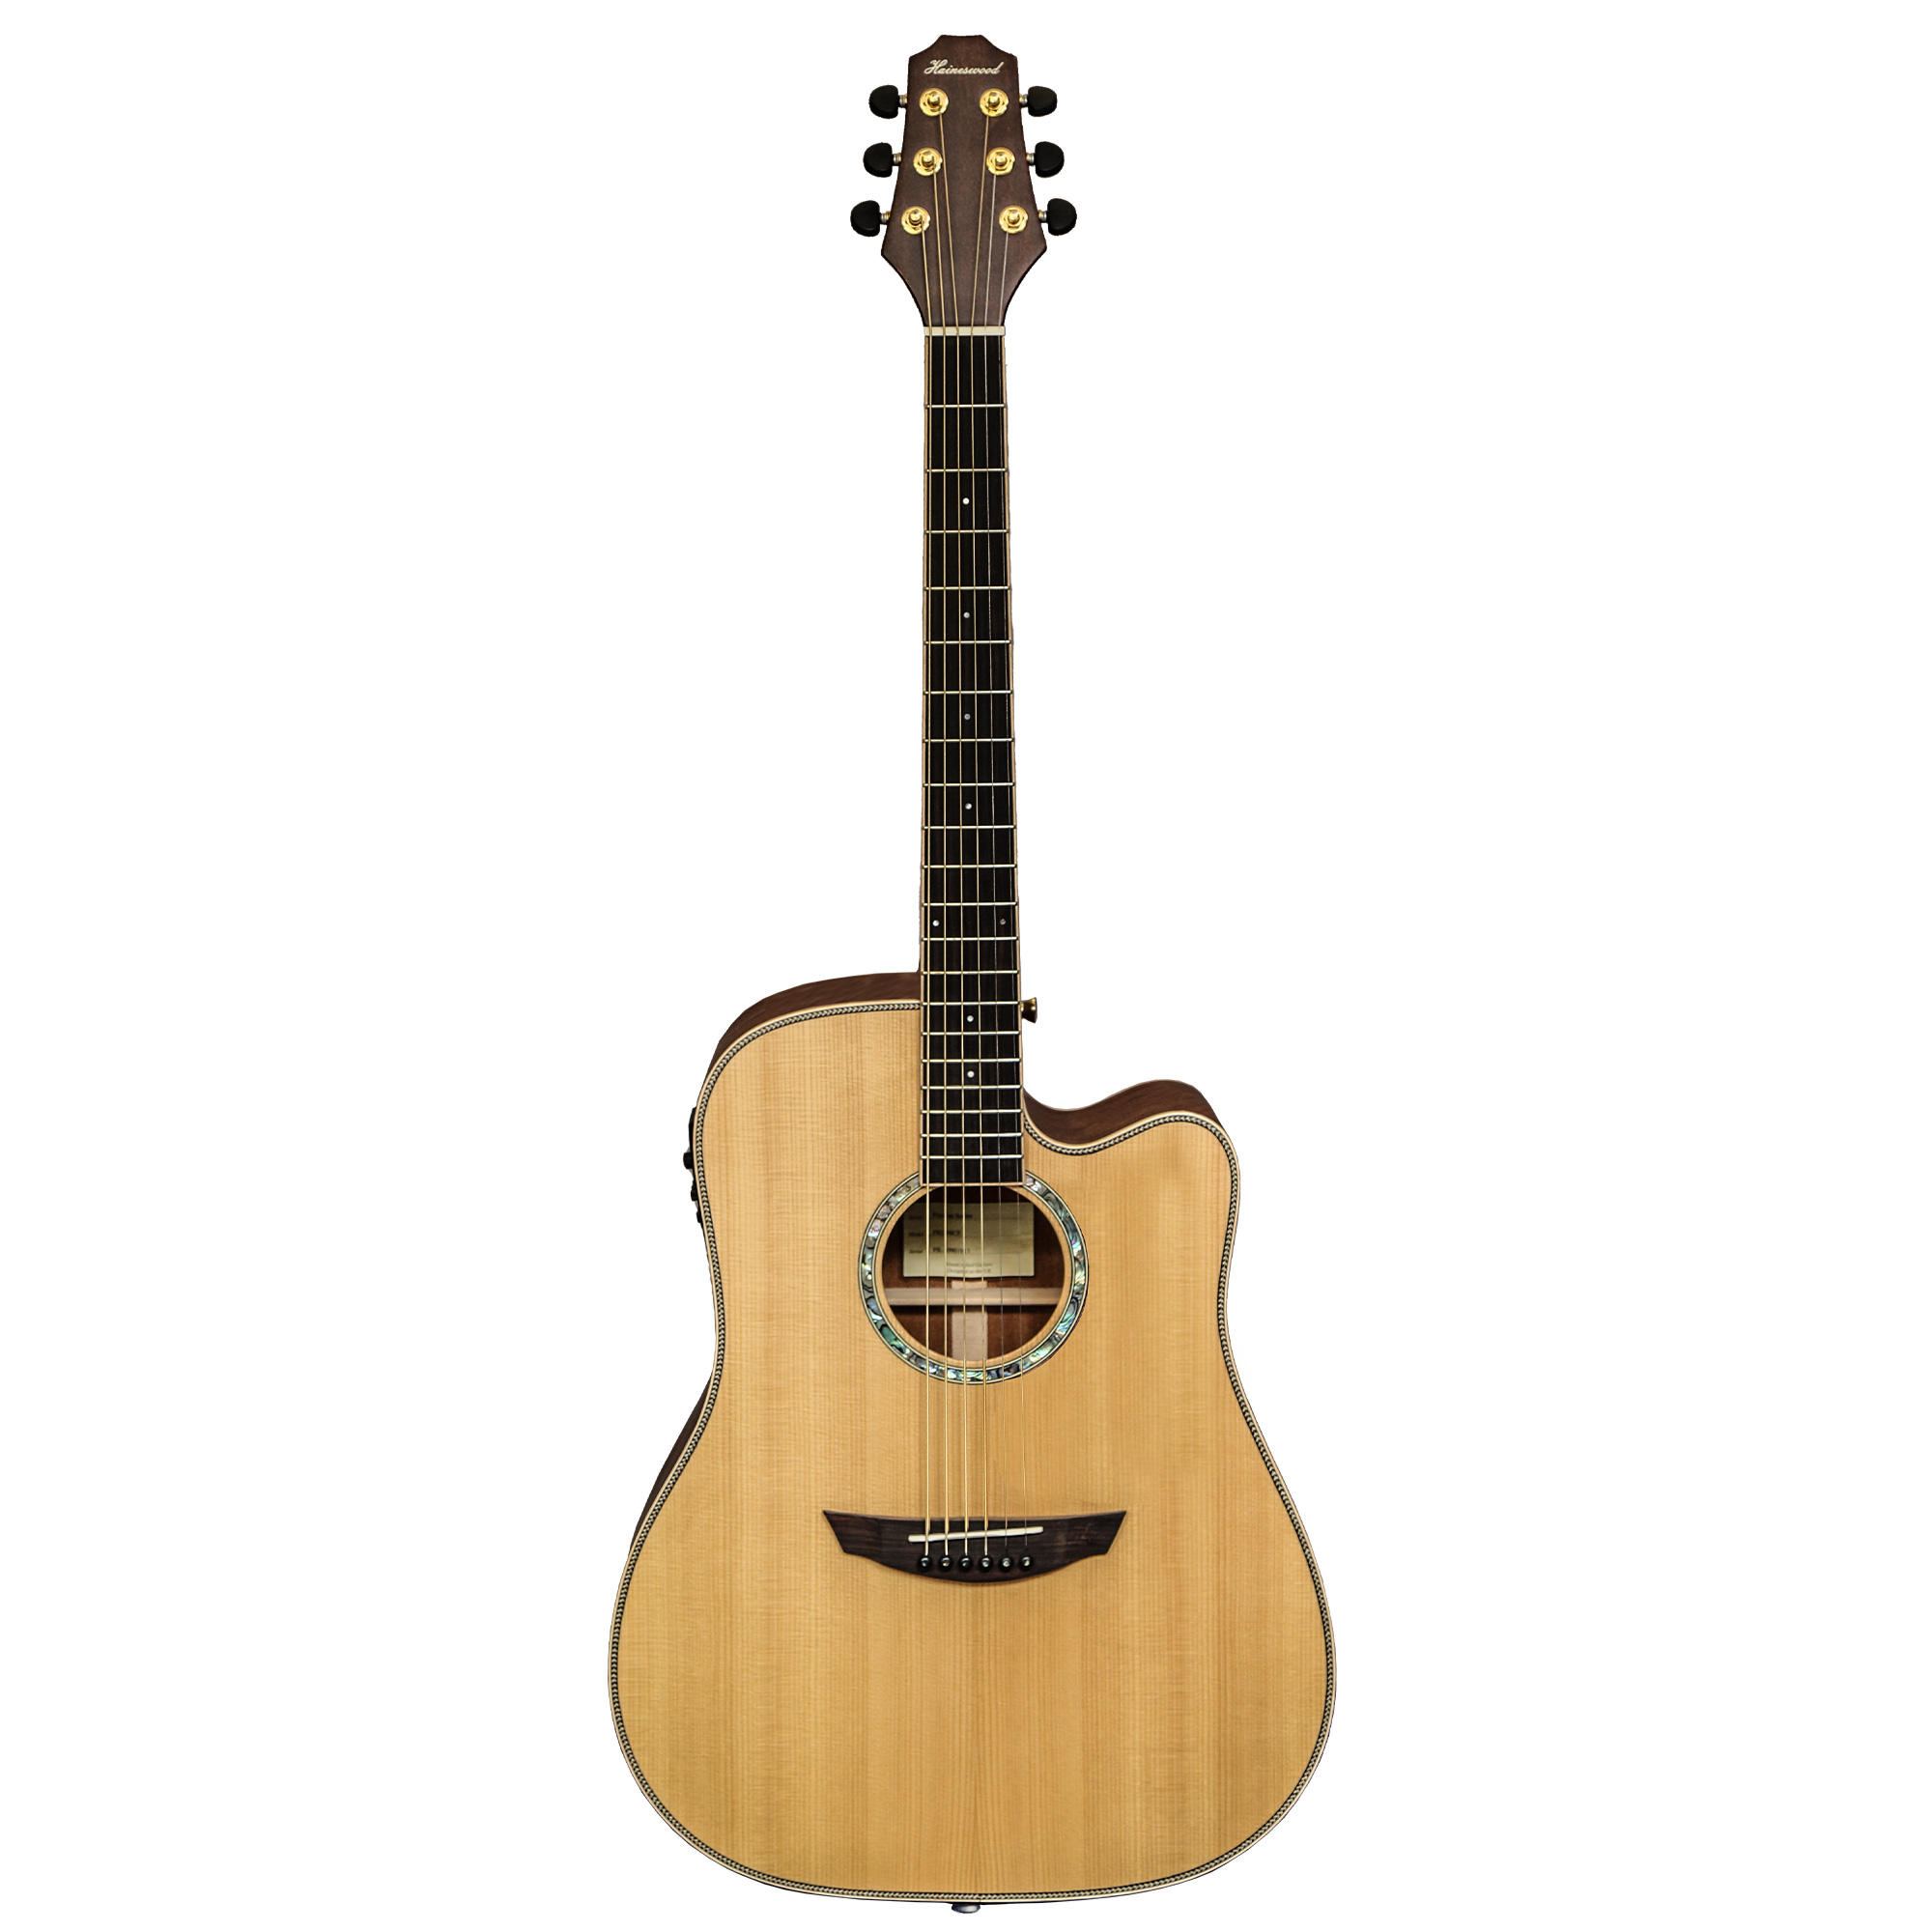 Haineswood Masterworks MWD95CE Dreadnought Cutaway Electro